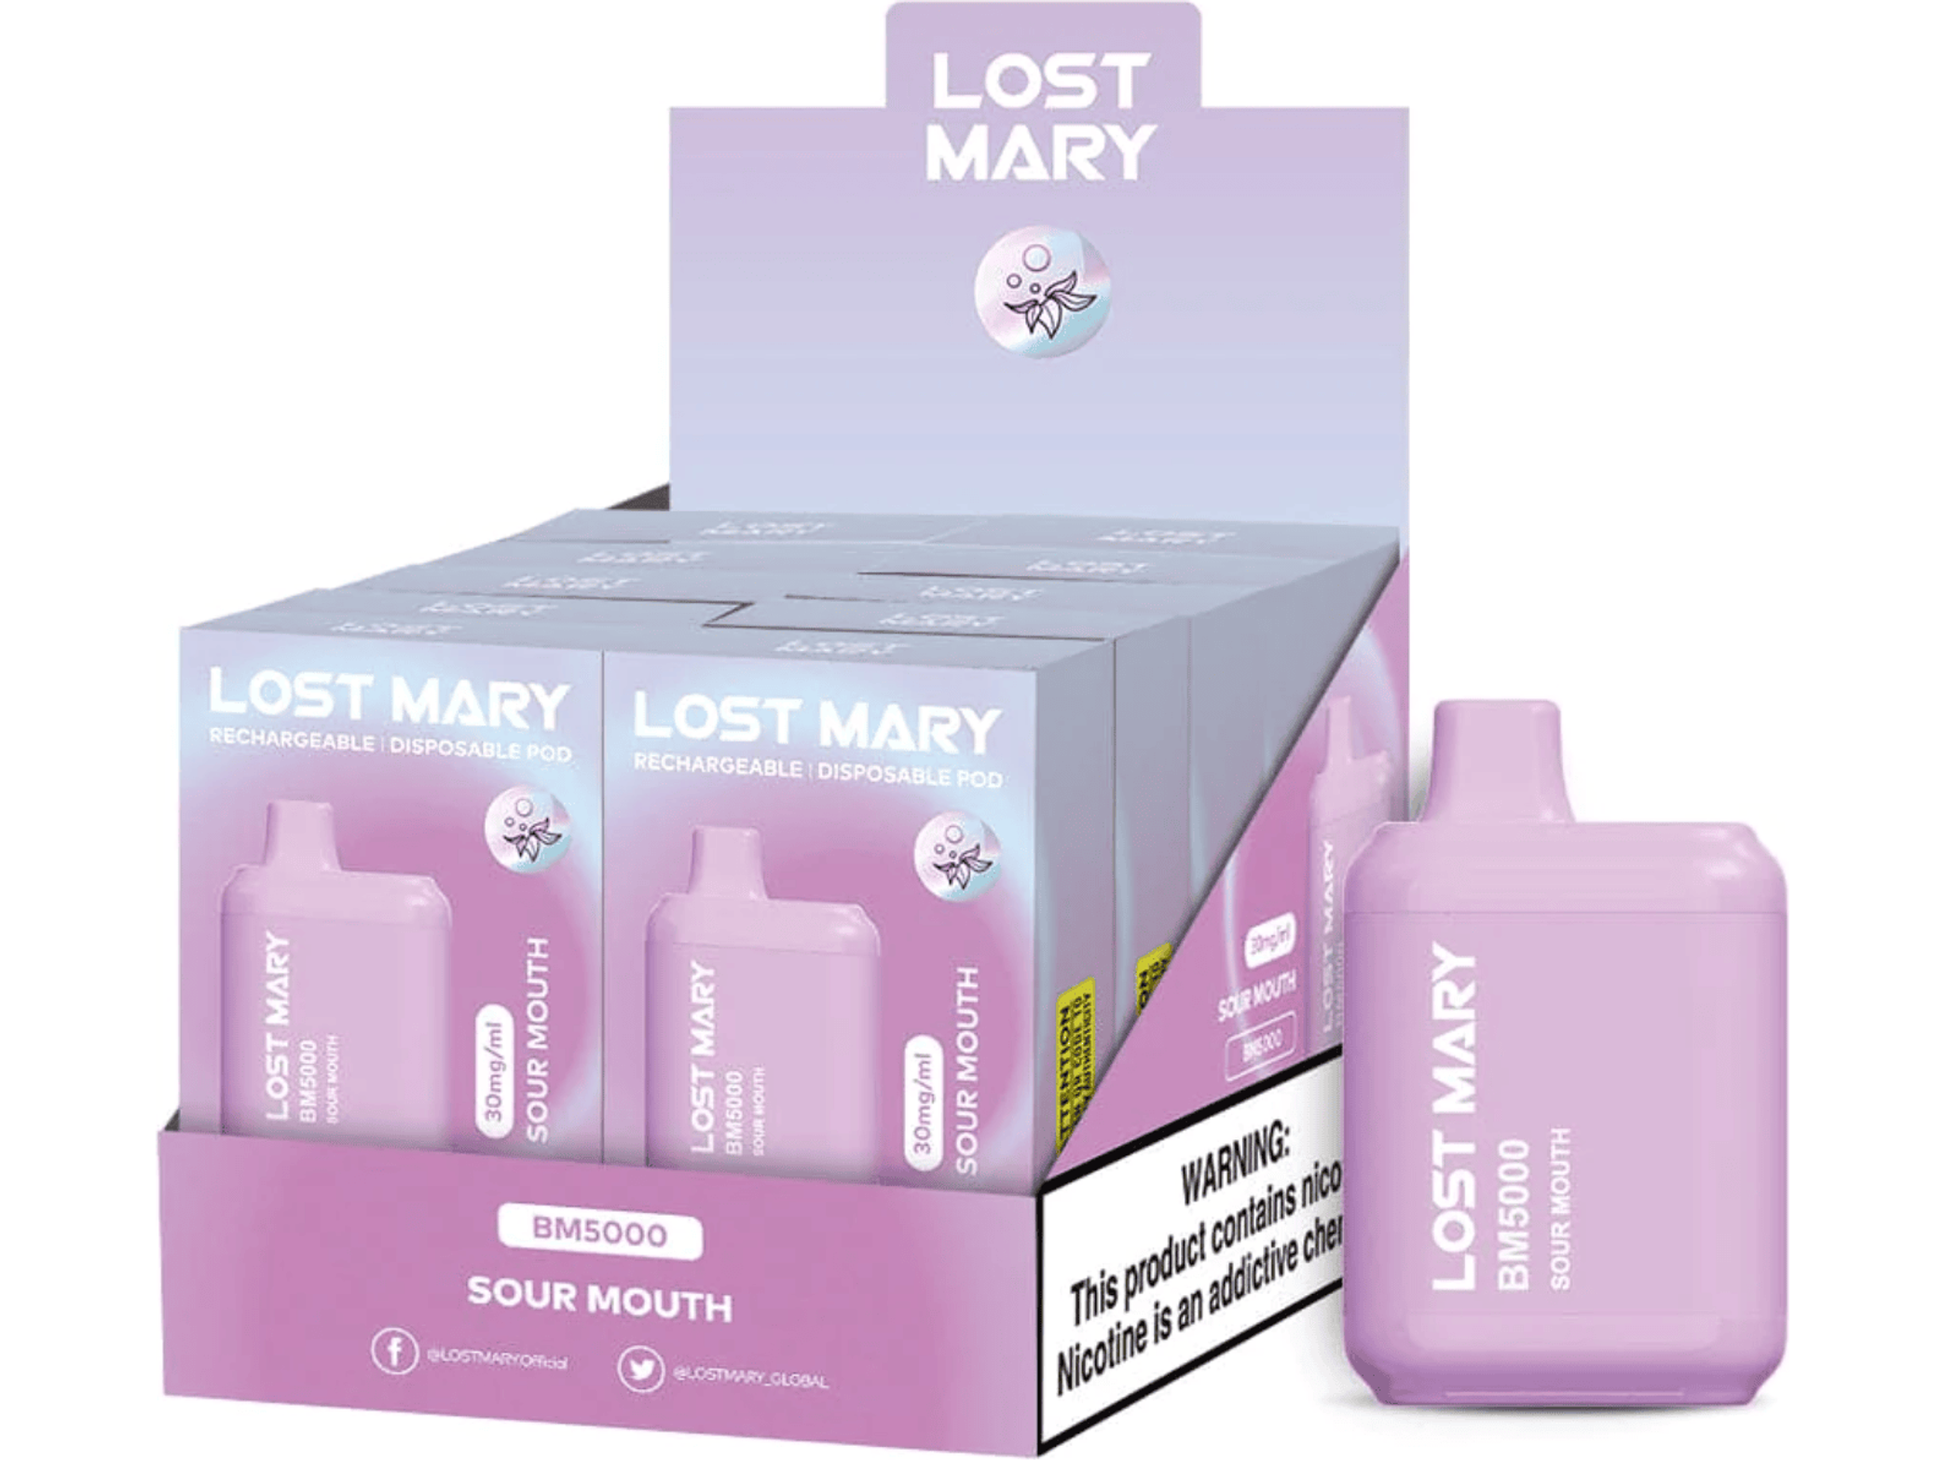 Lost Mary BM5000 Sour Mouth flavored disposable vape device and box.